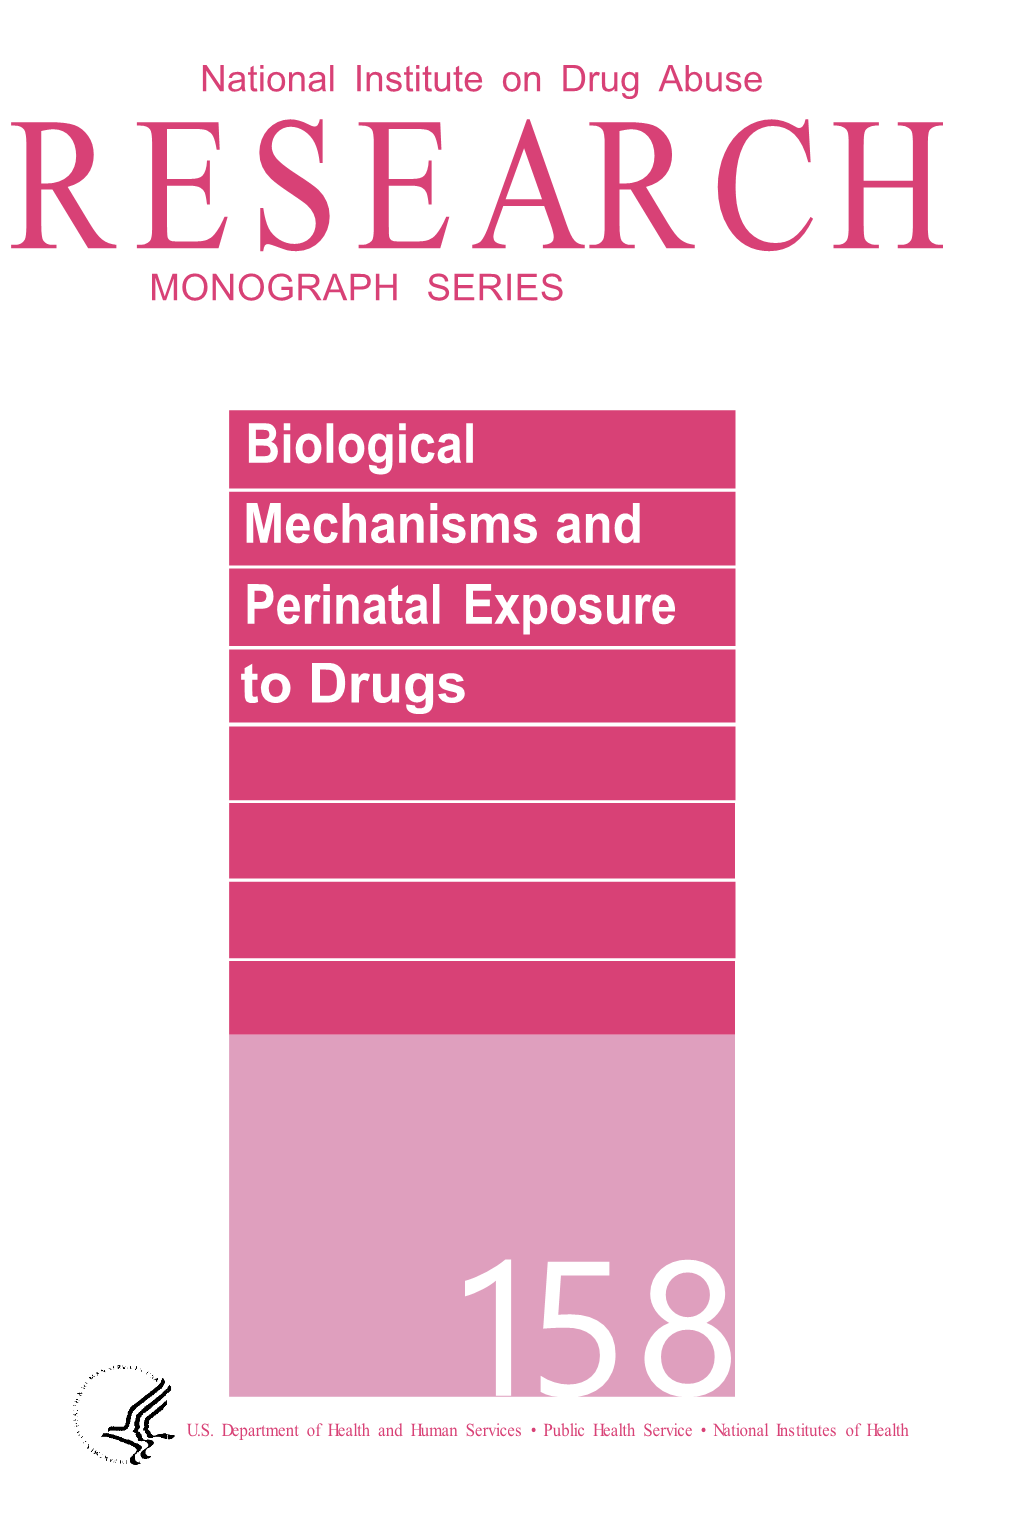 Biological Mechanisms and Perinatal Exposure to Drugs